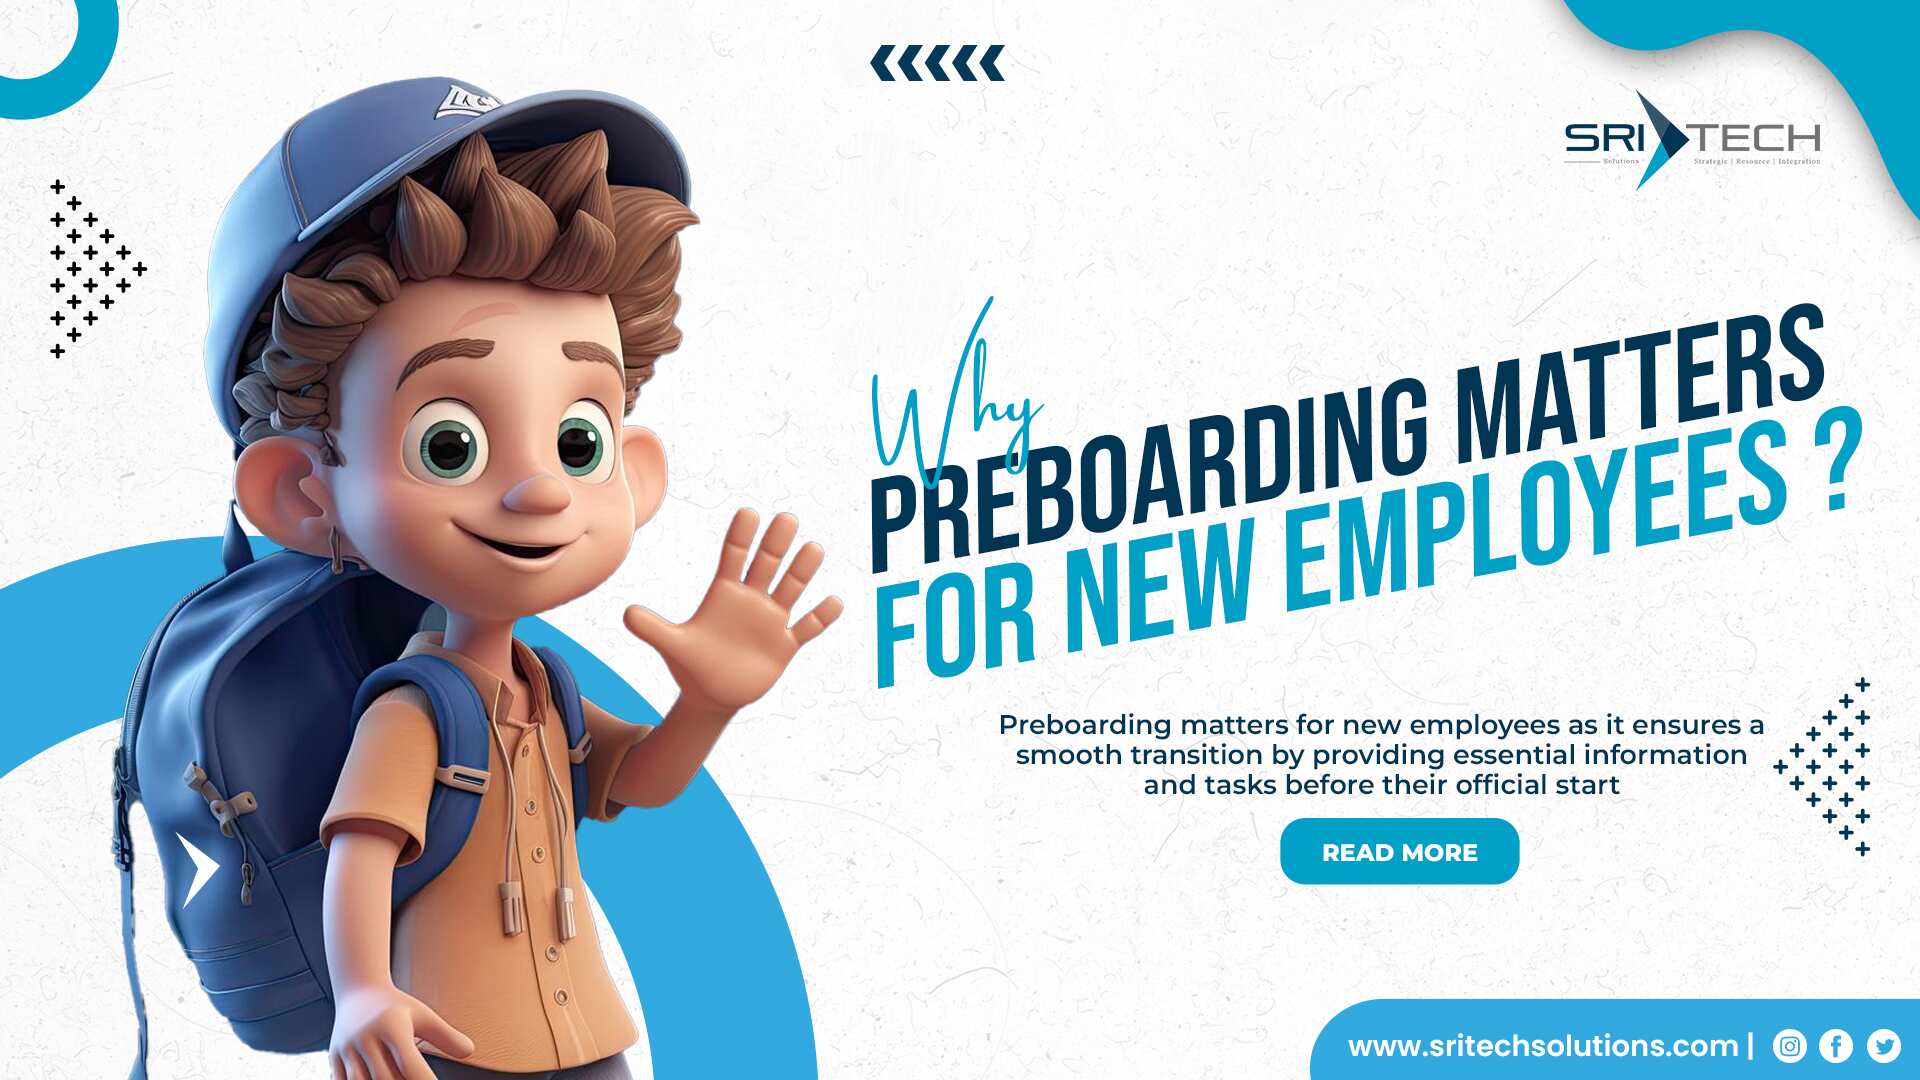 Why Preboarding Matters for New Employees?